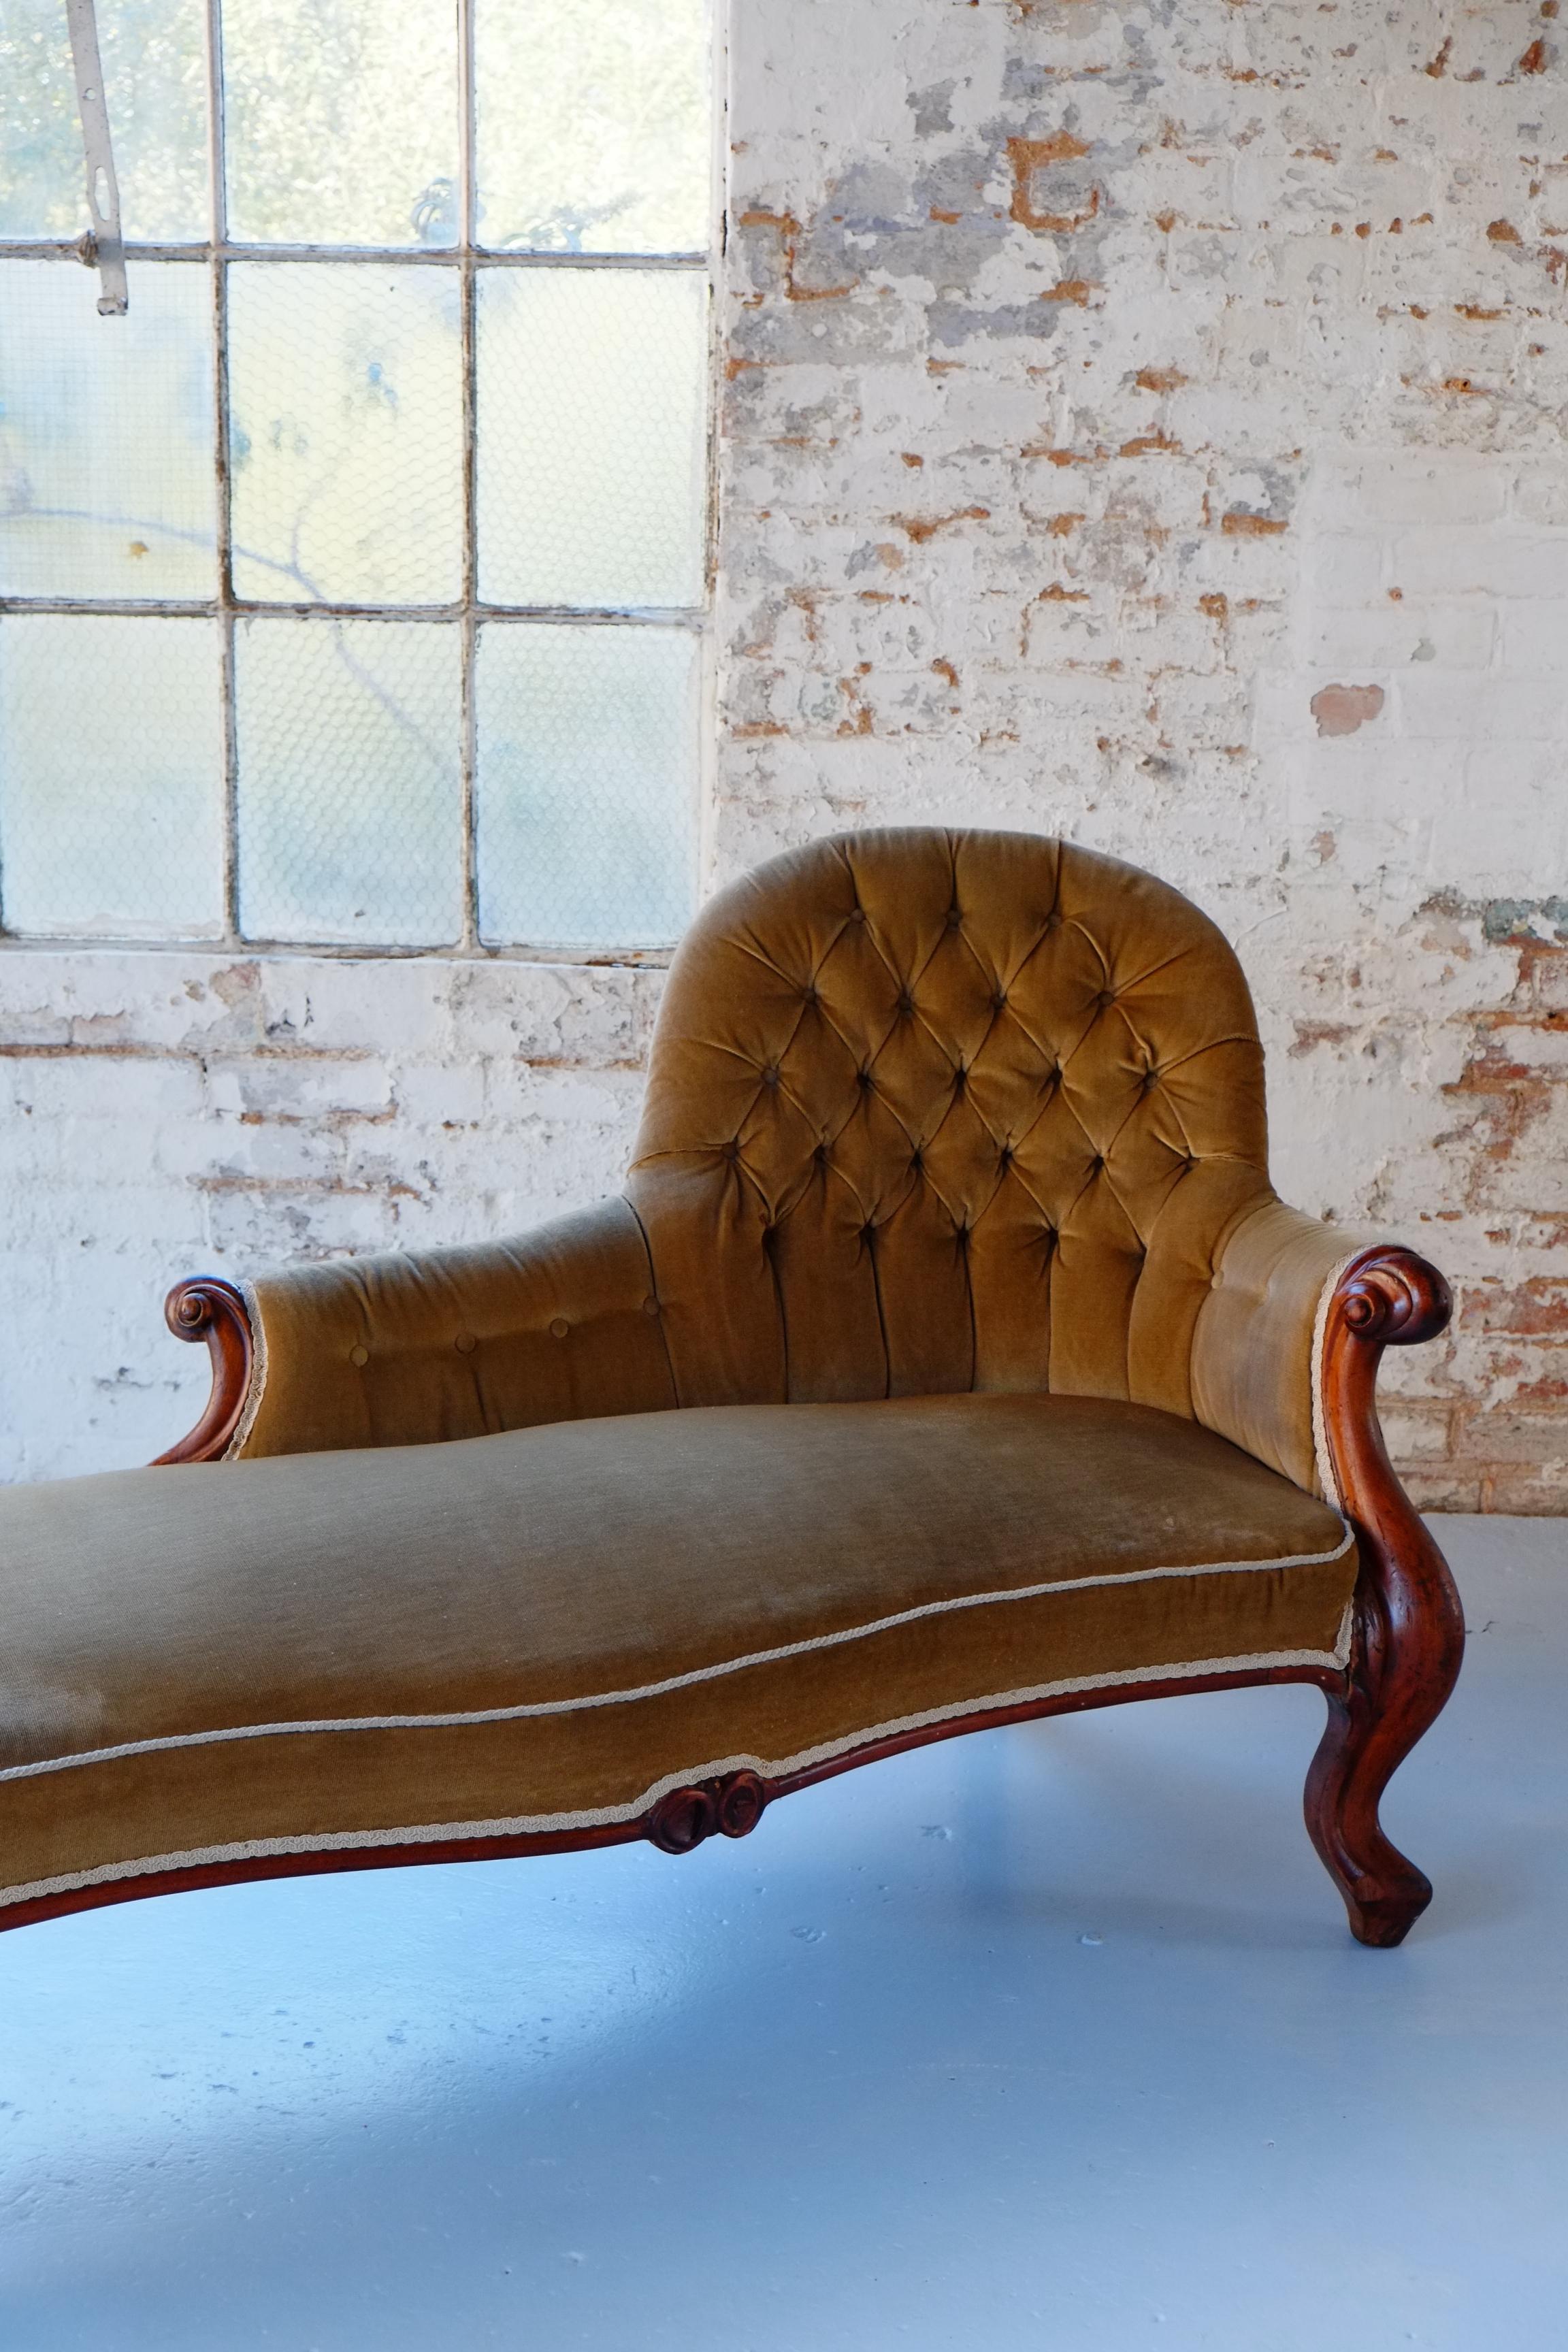 This is a handsome example of an antique French hand-carved chaise longue in Walnut. The chaise longue is upholstered in thick velvet, which is an earthy green, khaki color. The trimmings and piping are in creamy white to give the seat definition.